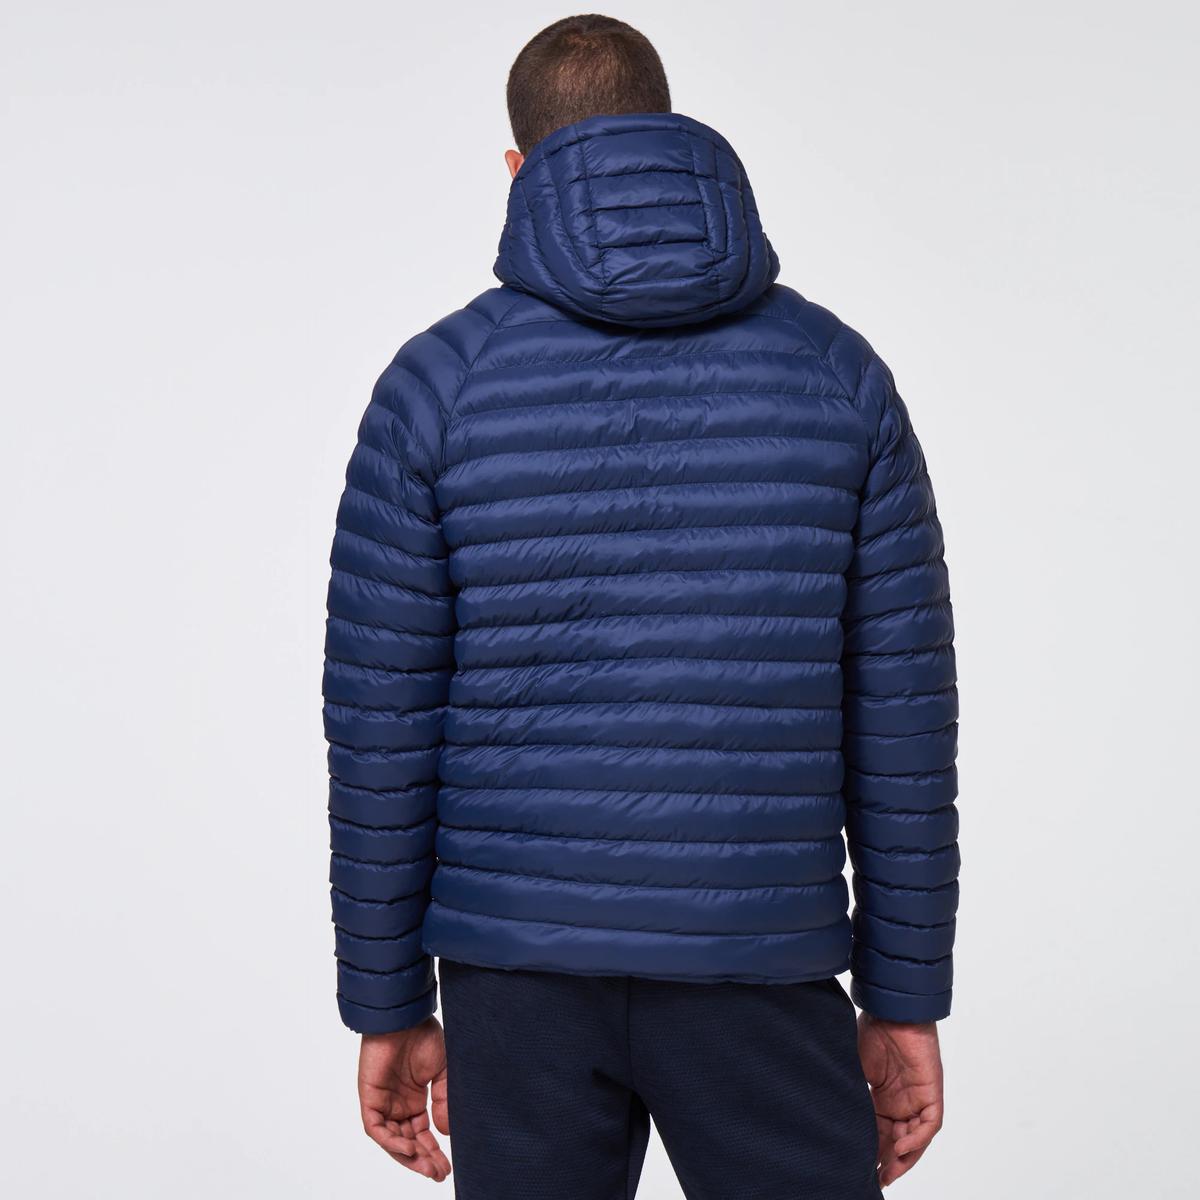 Encore Insulated Hooded Jacket